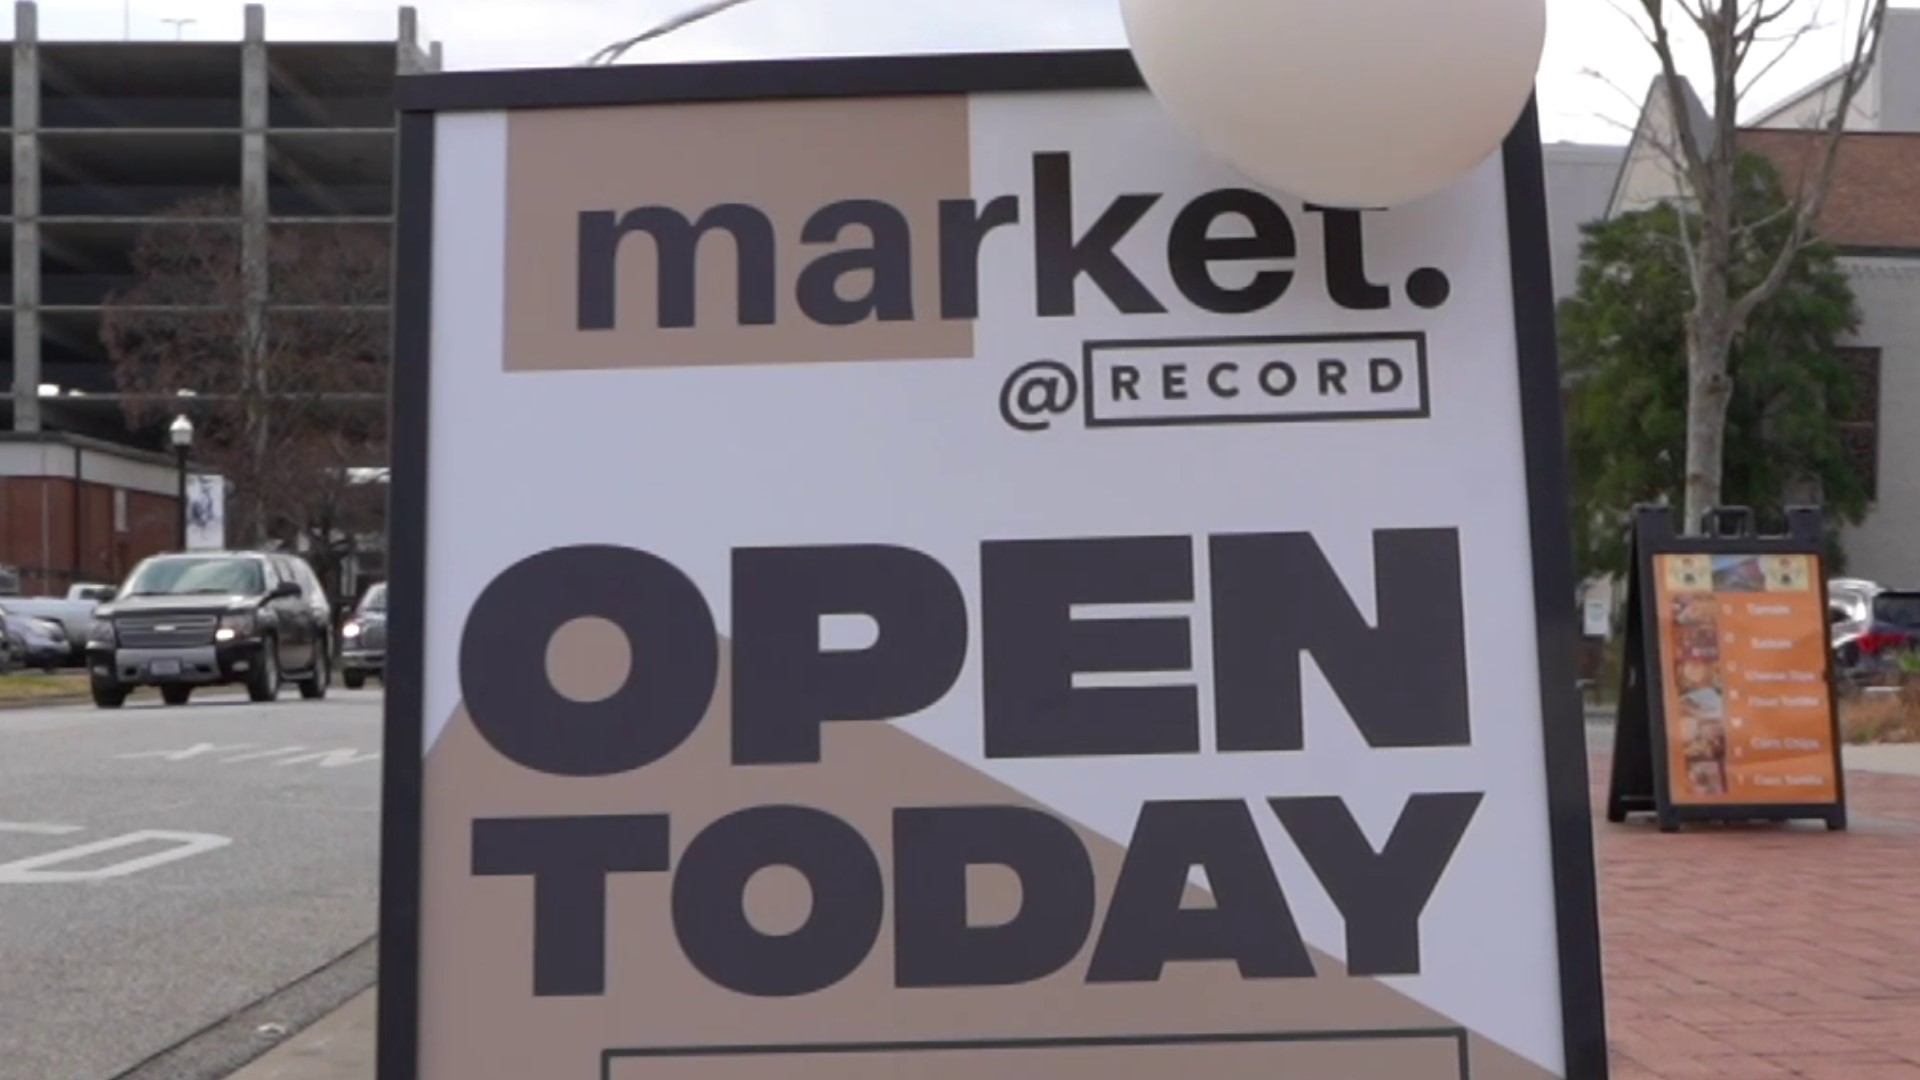 It's called Market @ Record.  It features a farmers market inside The Record on the Bentonville square on select Saturdays from now til March.